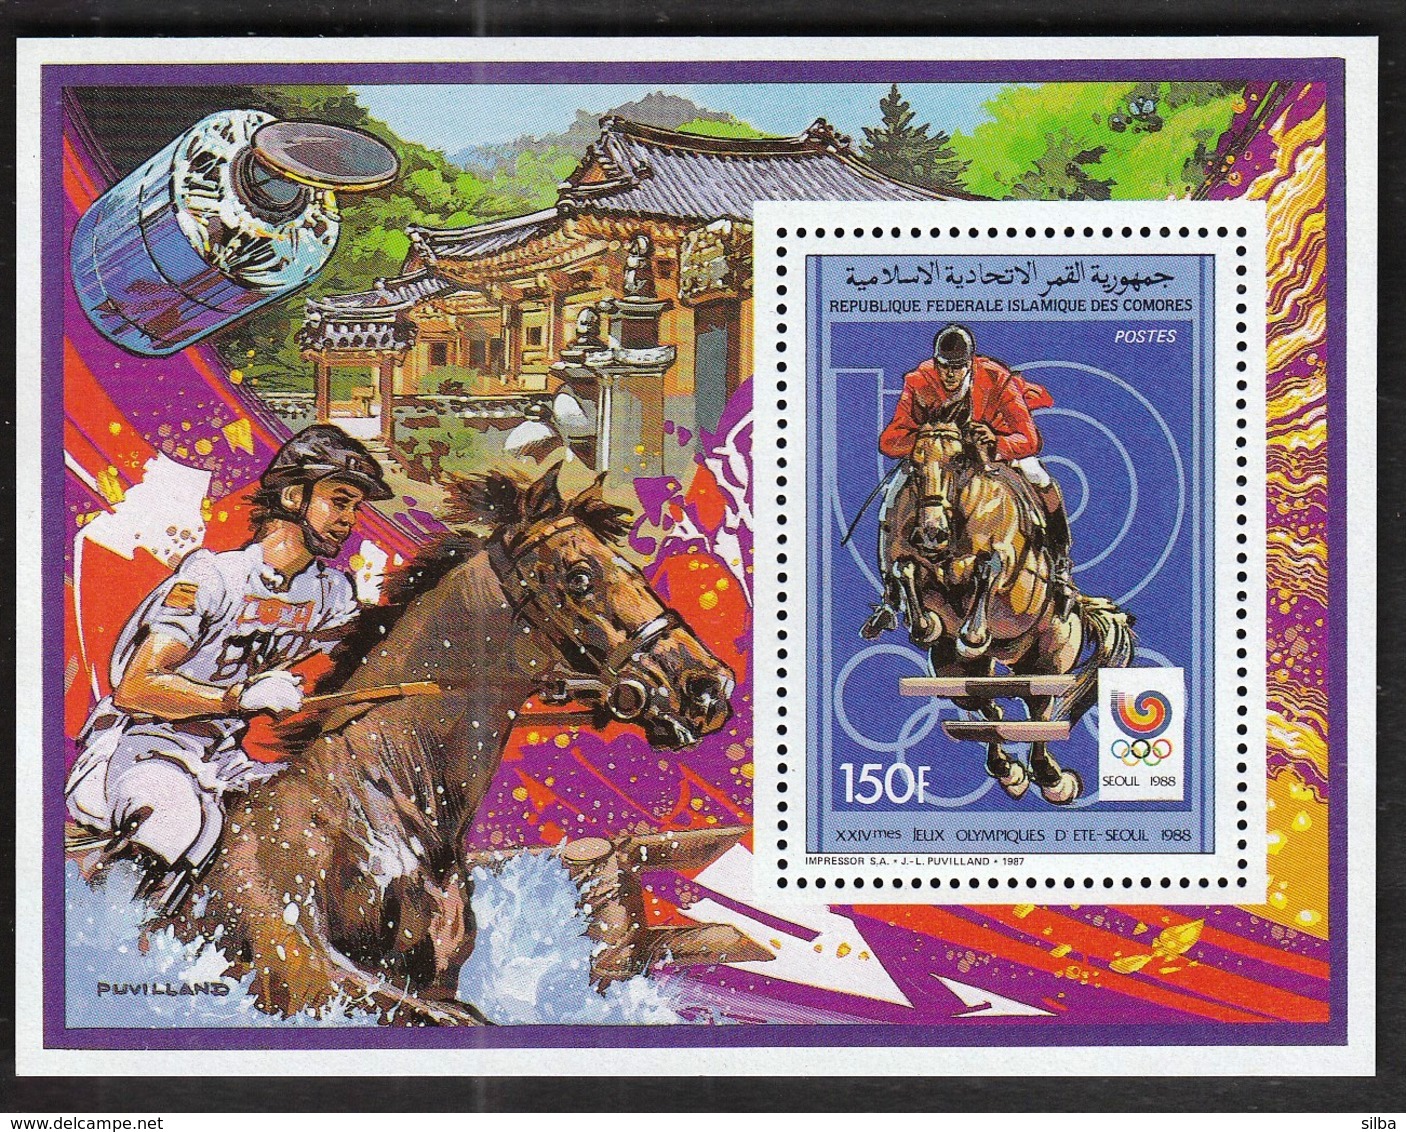 Comores, Comoro Islands 1987 / Olympic Games Seoul 1988 / Equestrian, Horses / Mi Bl 251 / MNH - Sommer 1988: Seoul